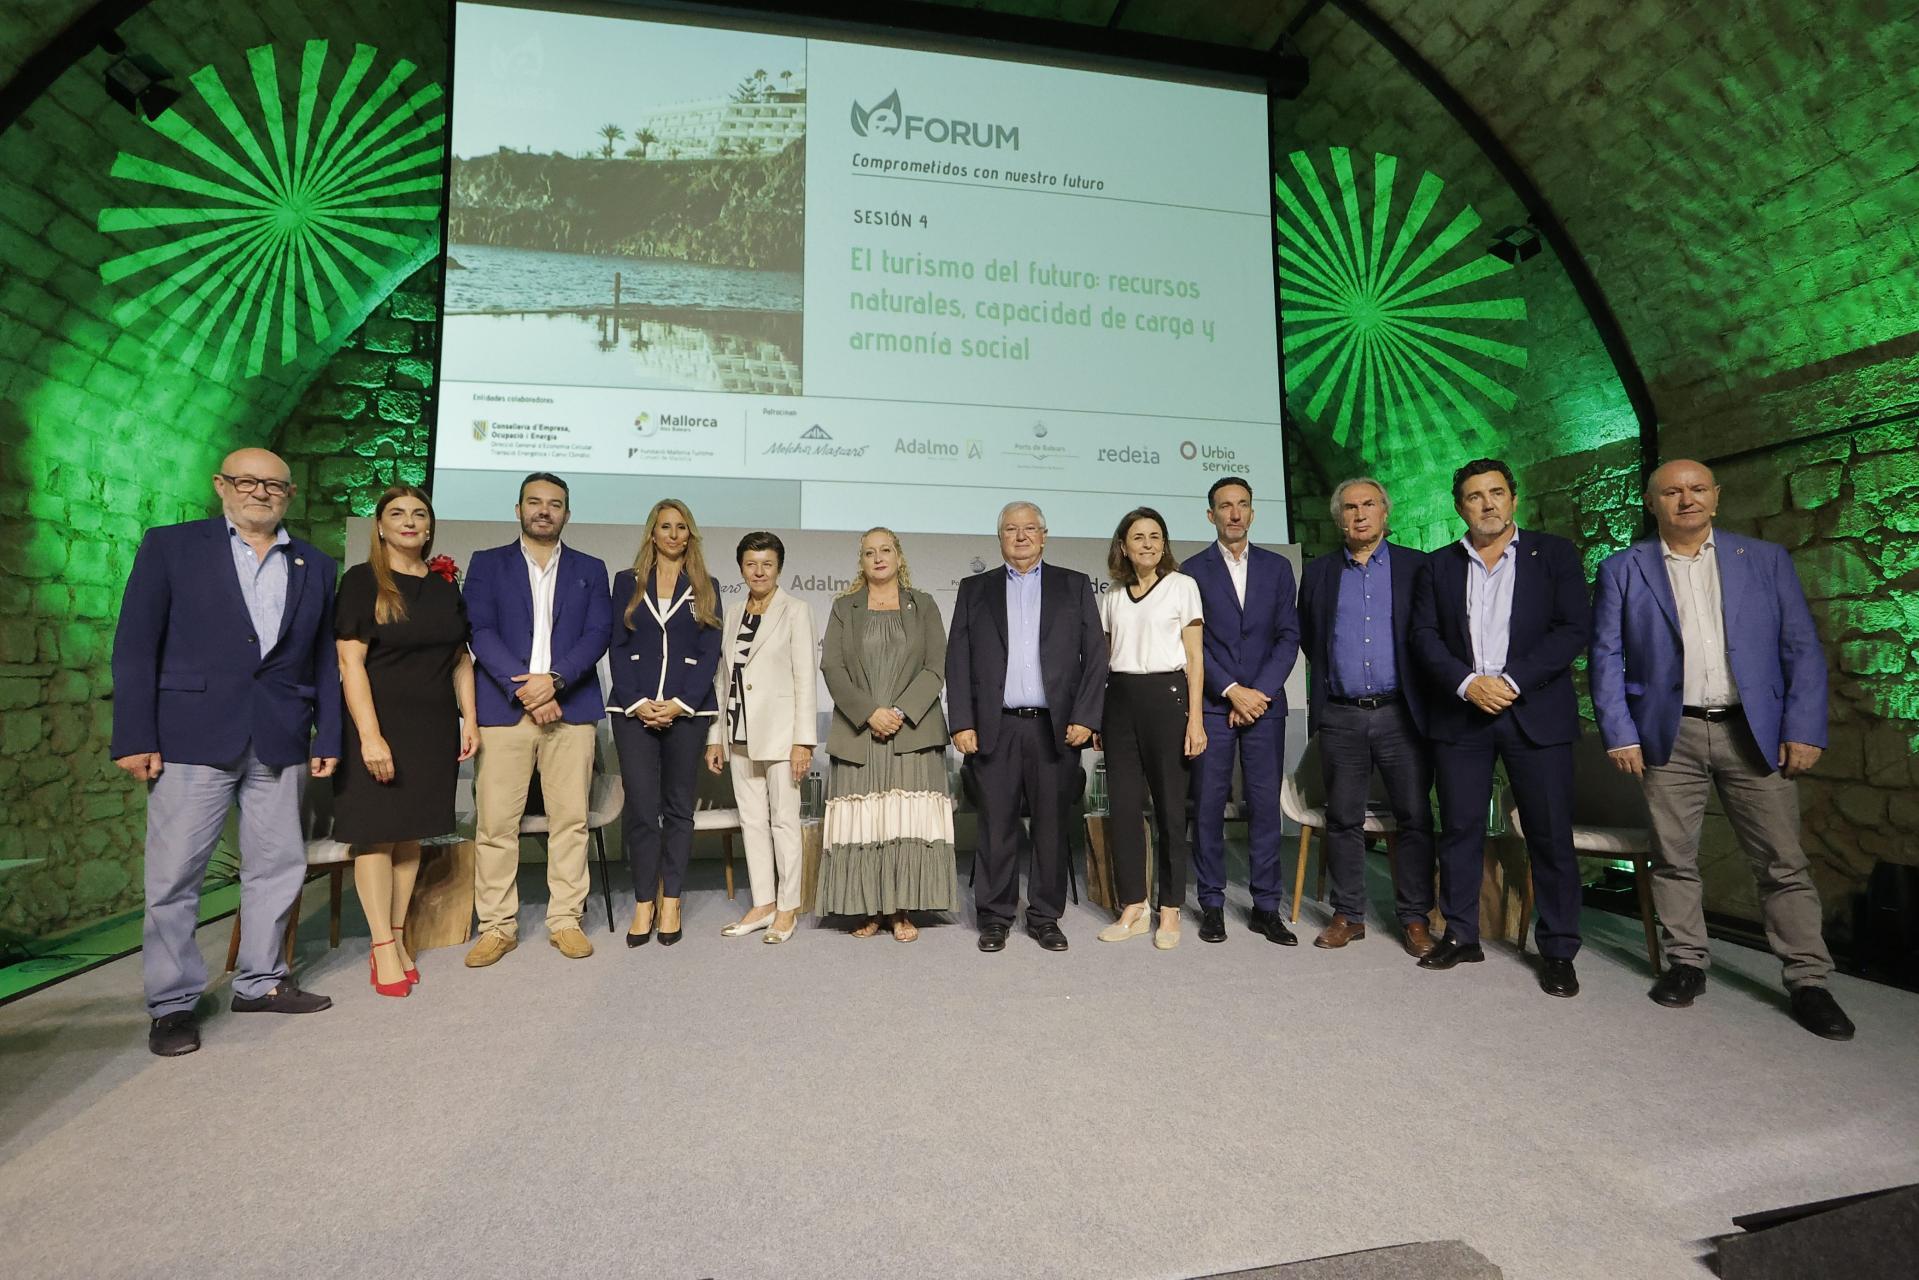 Sustainability in tourism: a new course at the eMallorca Forum